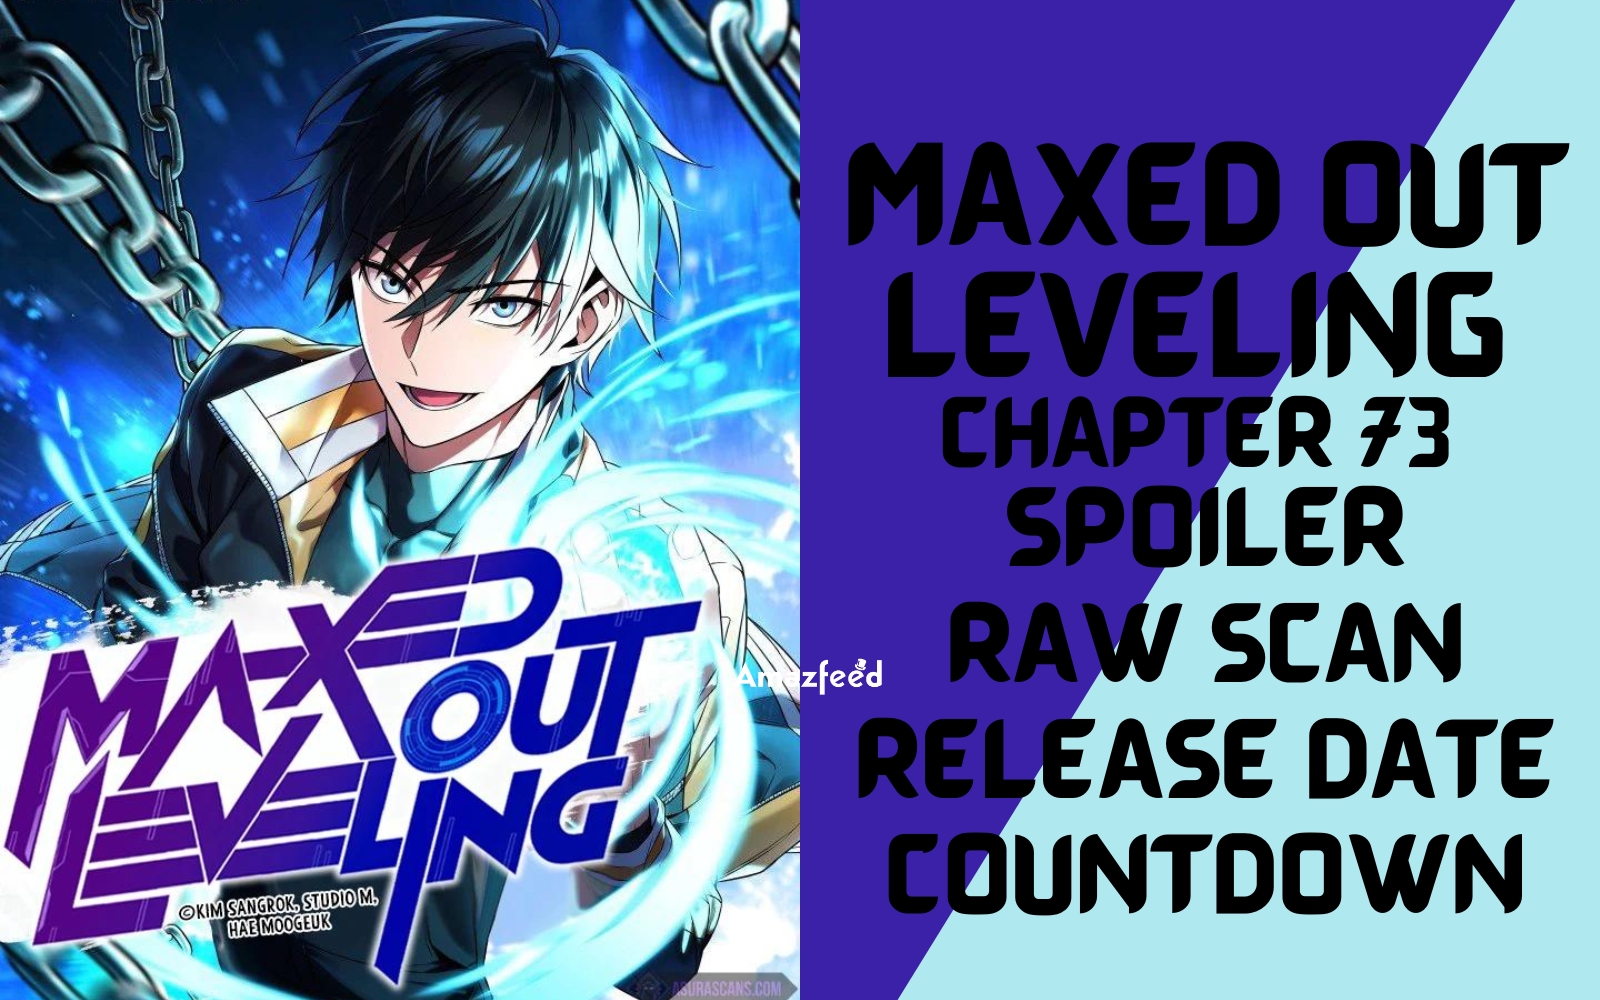 Maxed Out Leveling Chapter 73 Spoiler, Raw Scan, Plot, Color Page, Release Date